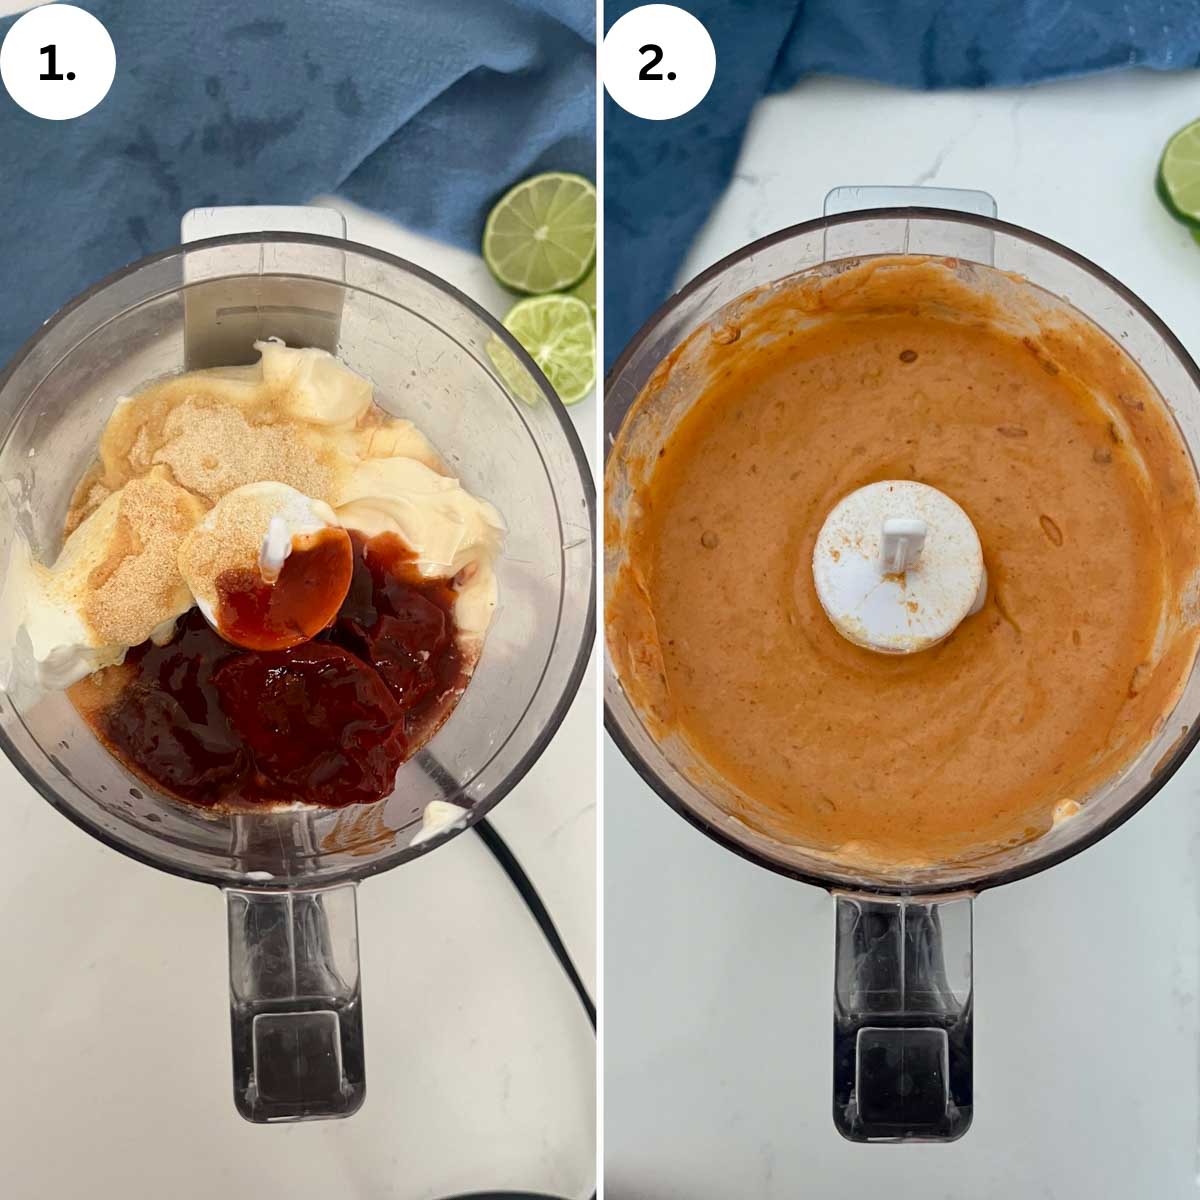 step by step instructions on how to make chipotle sauce.